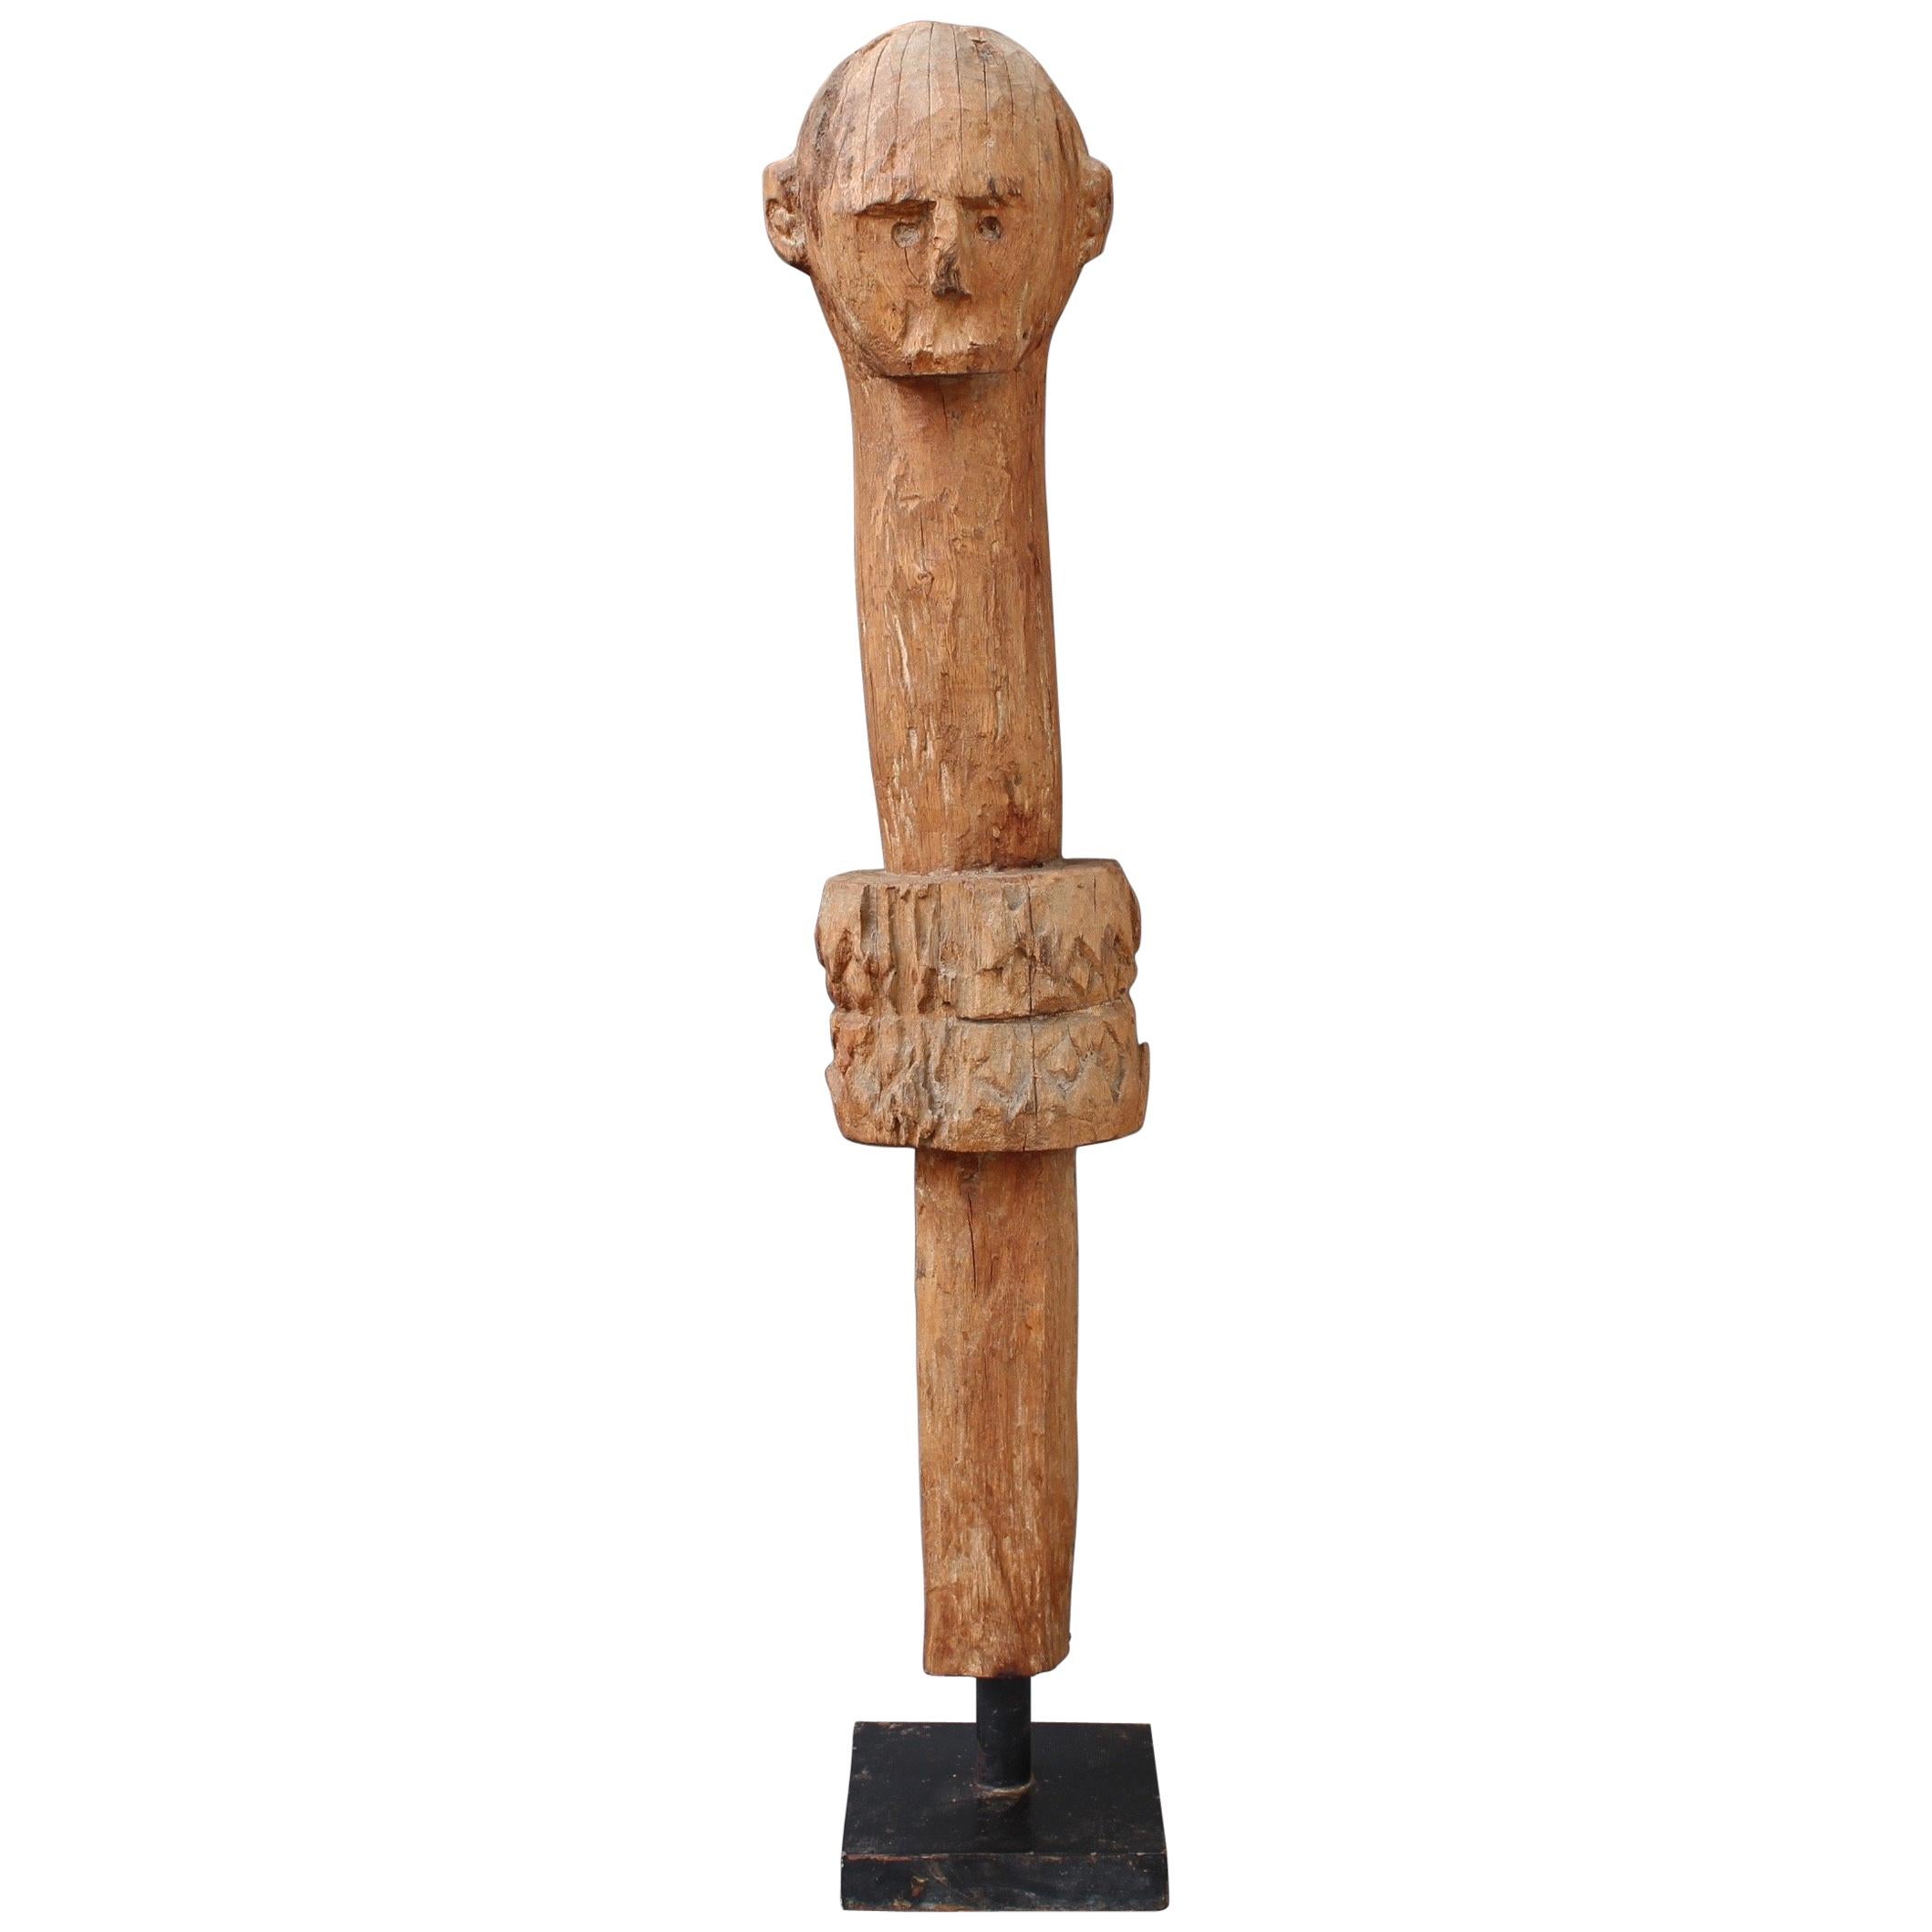 Midcentury Wooden Carving of Protective Figure from Sumba Island, Indonesia